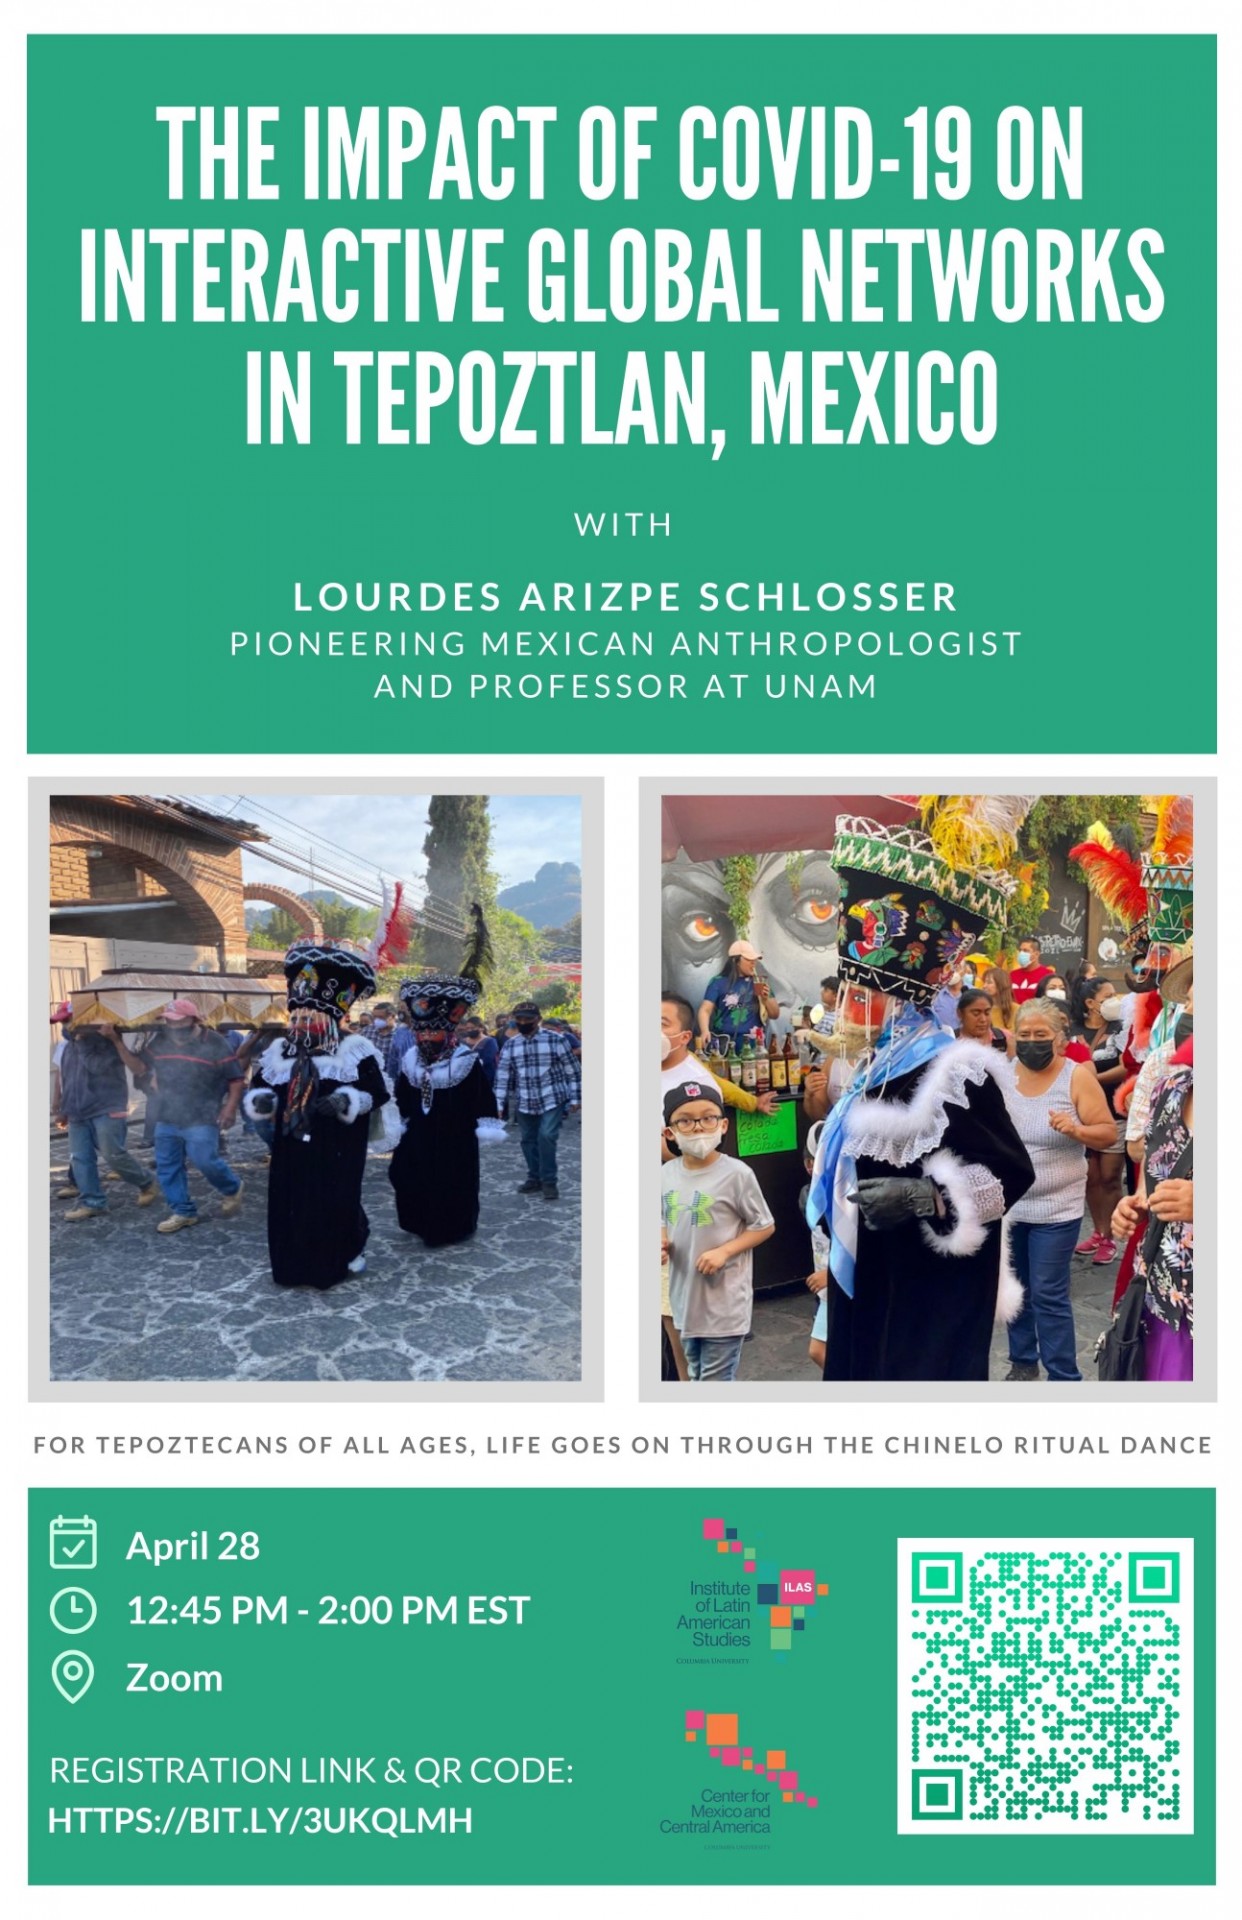 Flyer: The Impact of COVID-19 on Interactive Global Networks in Tepoztlan, Mexico